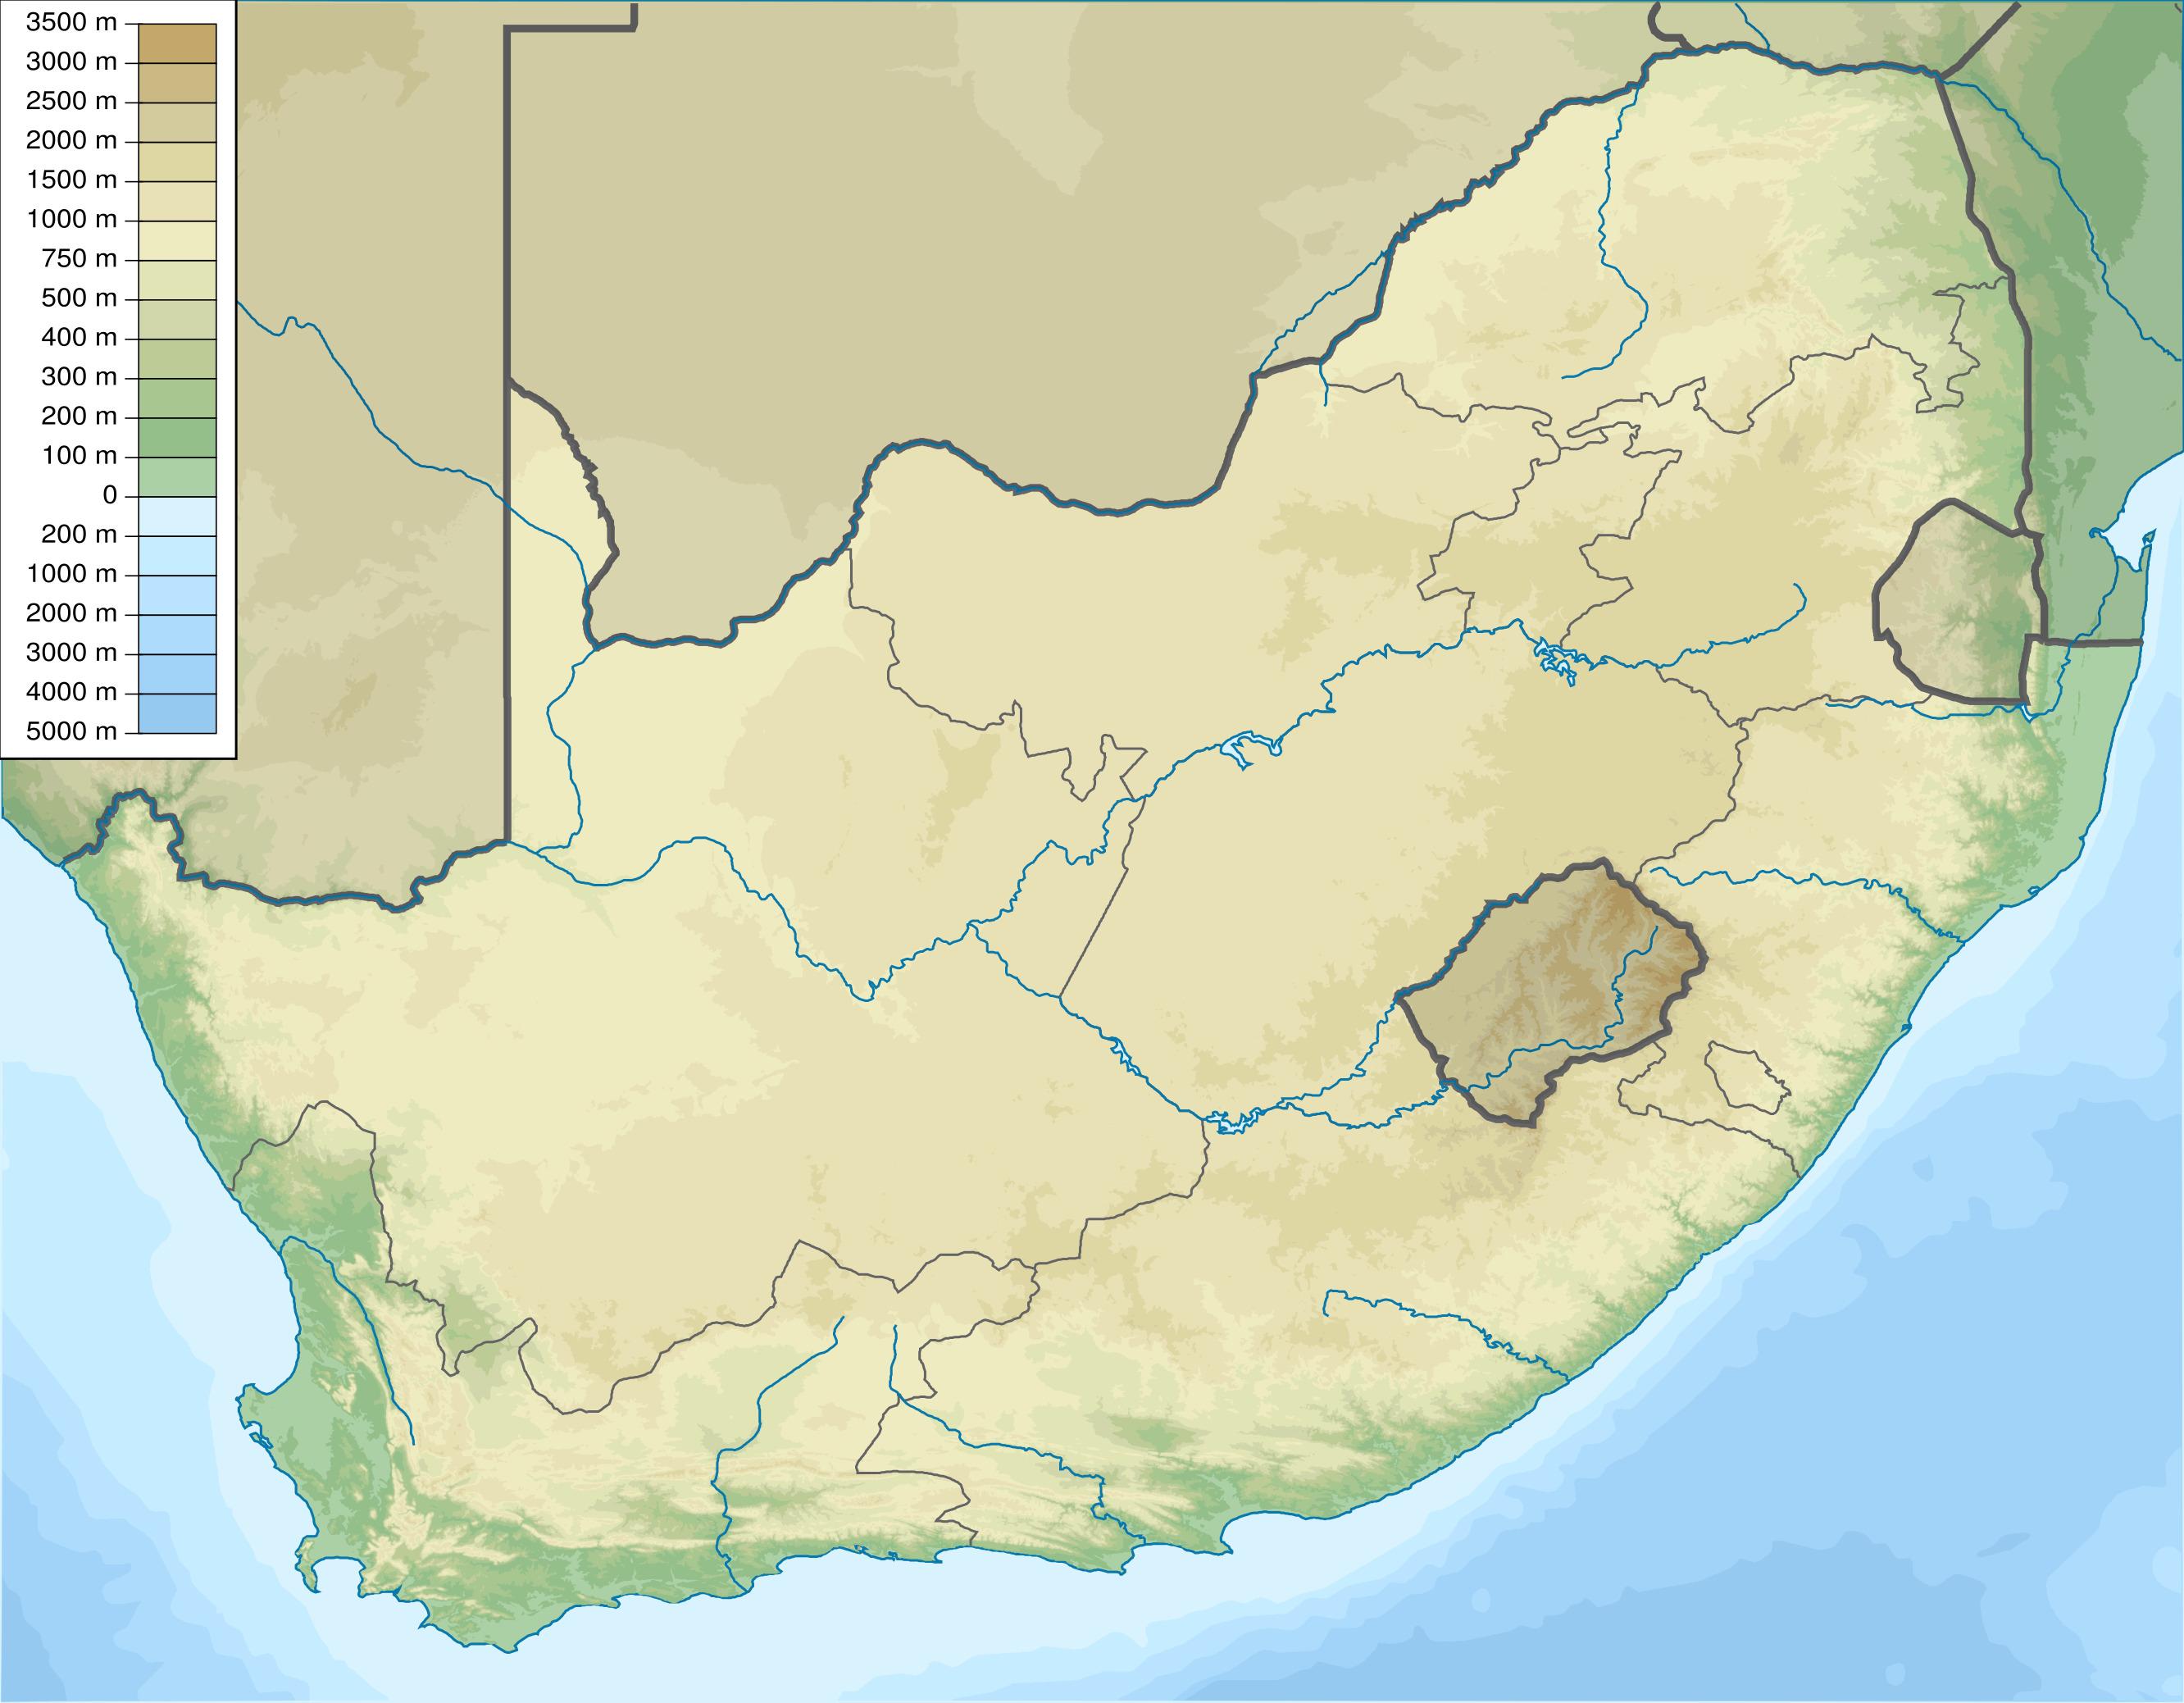 Geographical Map Of South Africa Topography And Physical Features Of